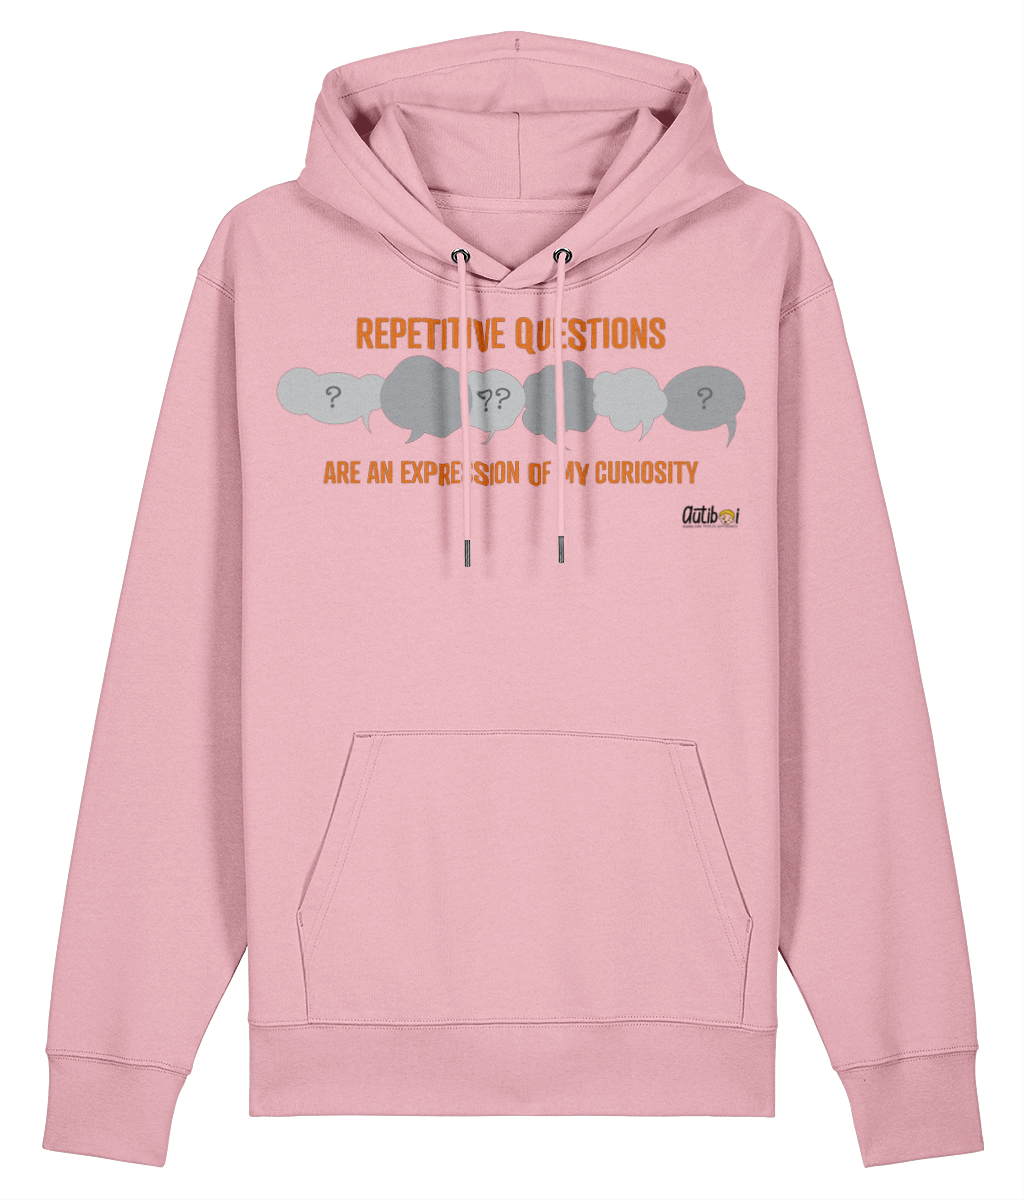 Repetitive Questions - Adult Hoodie